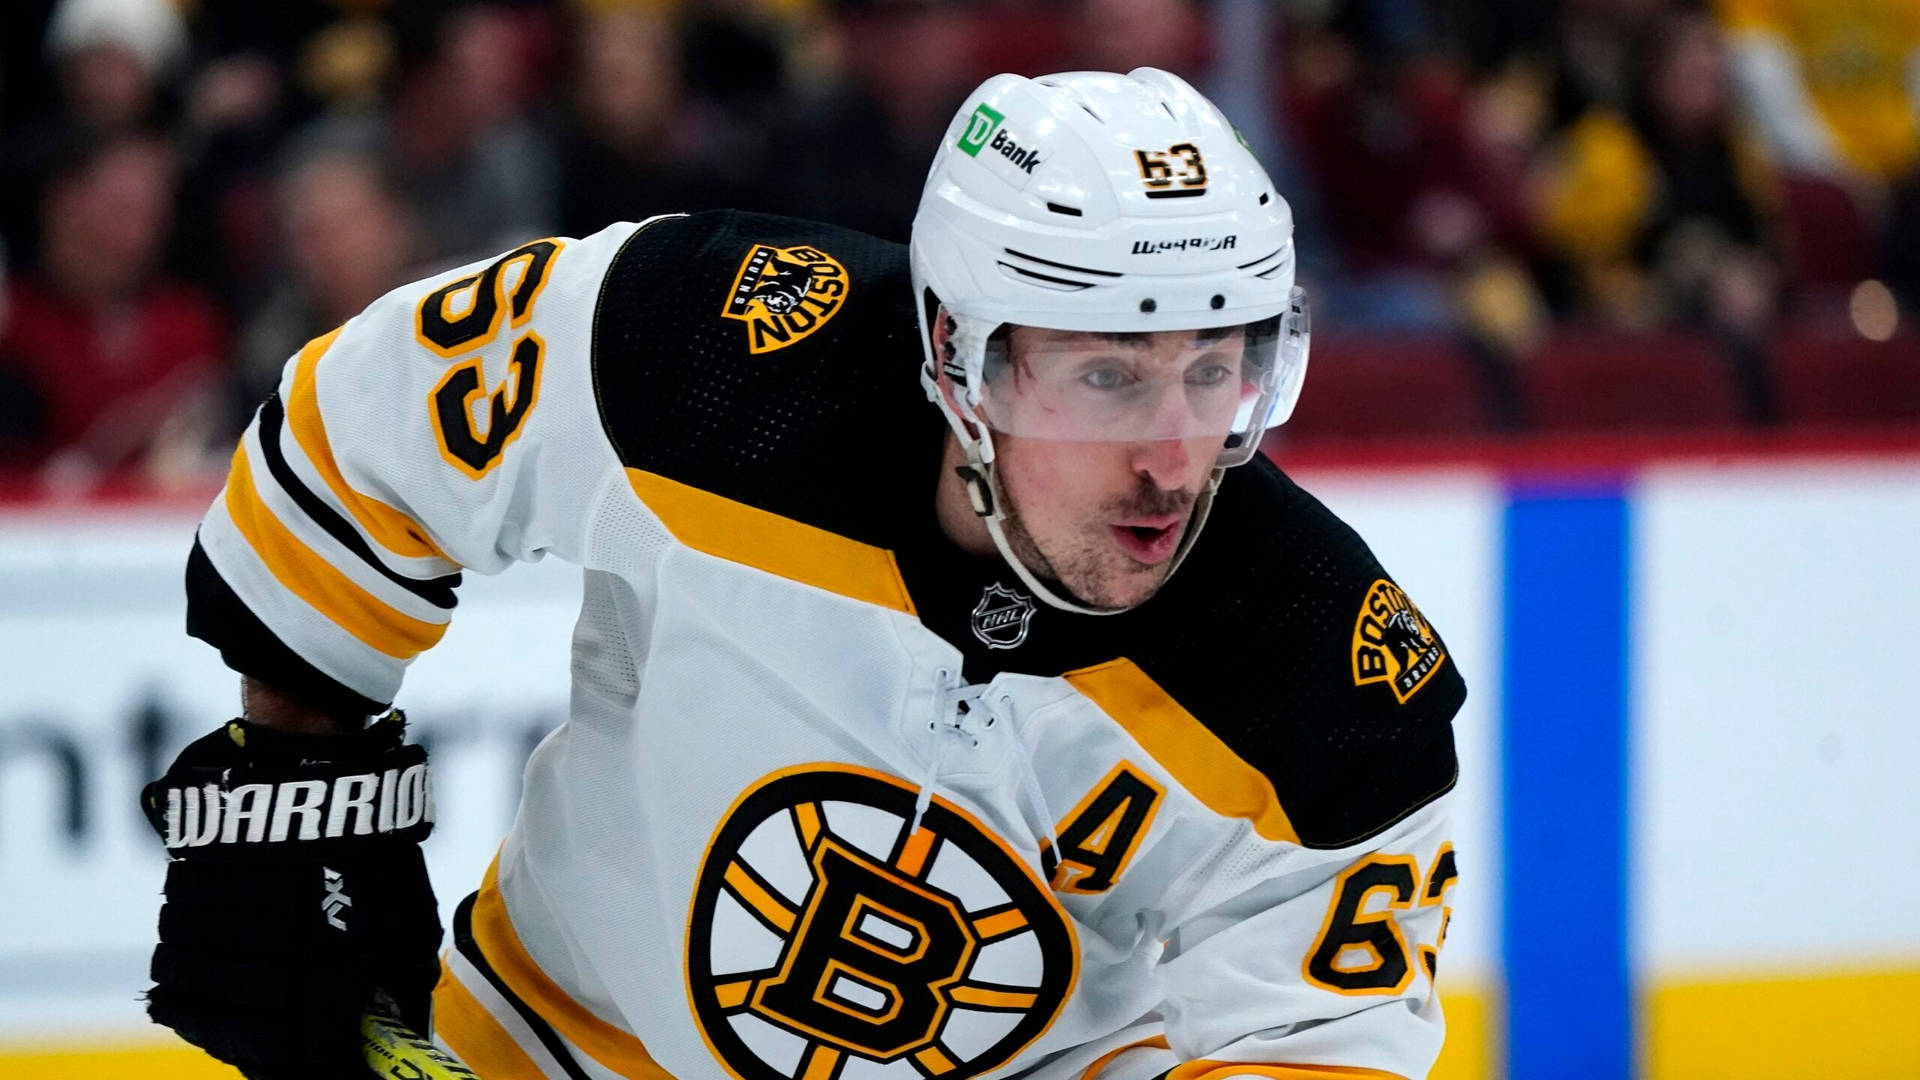 Brad Marchand Of The Boston Bruins In Action With White Uniform. Background